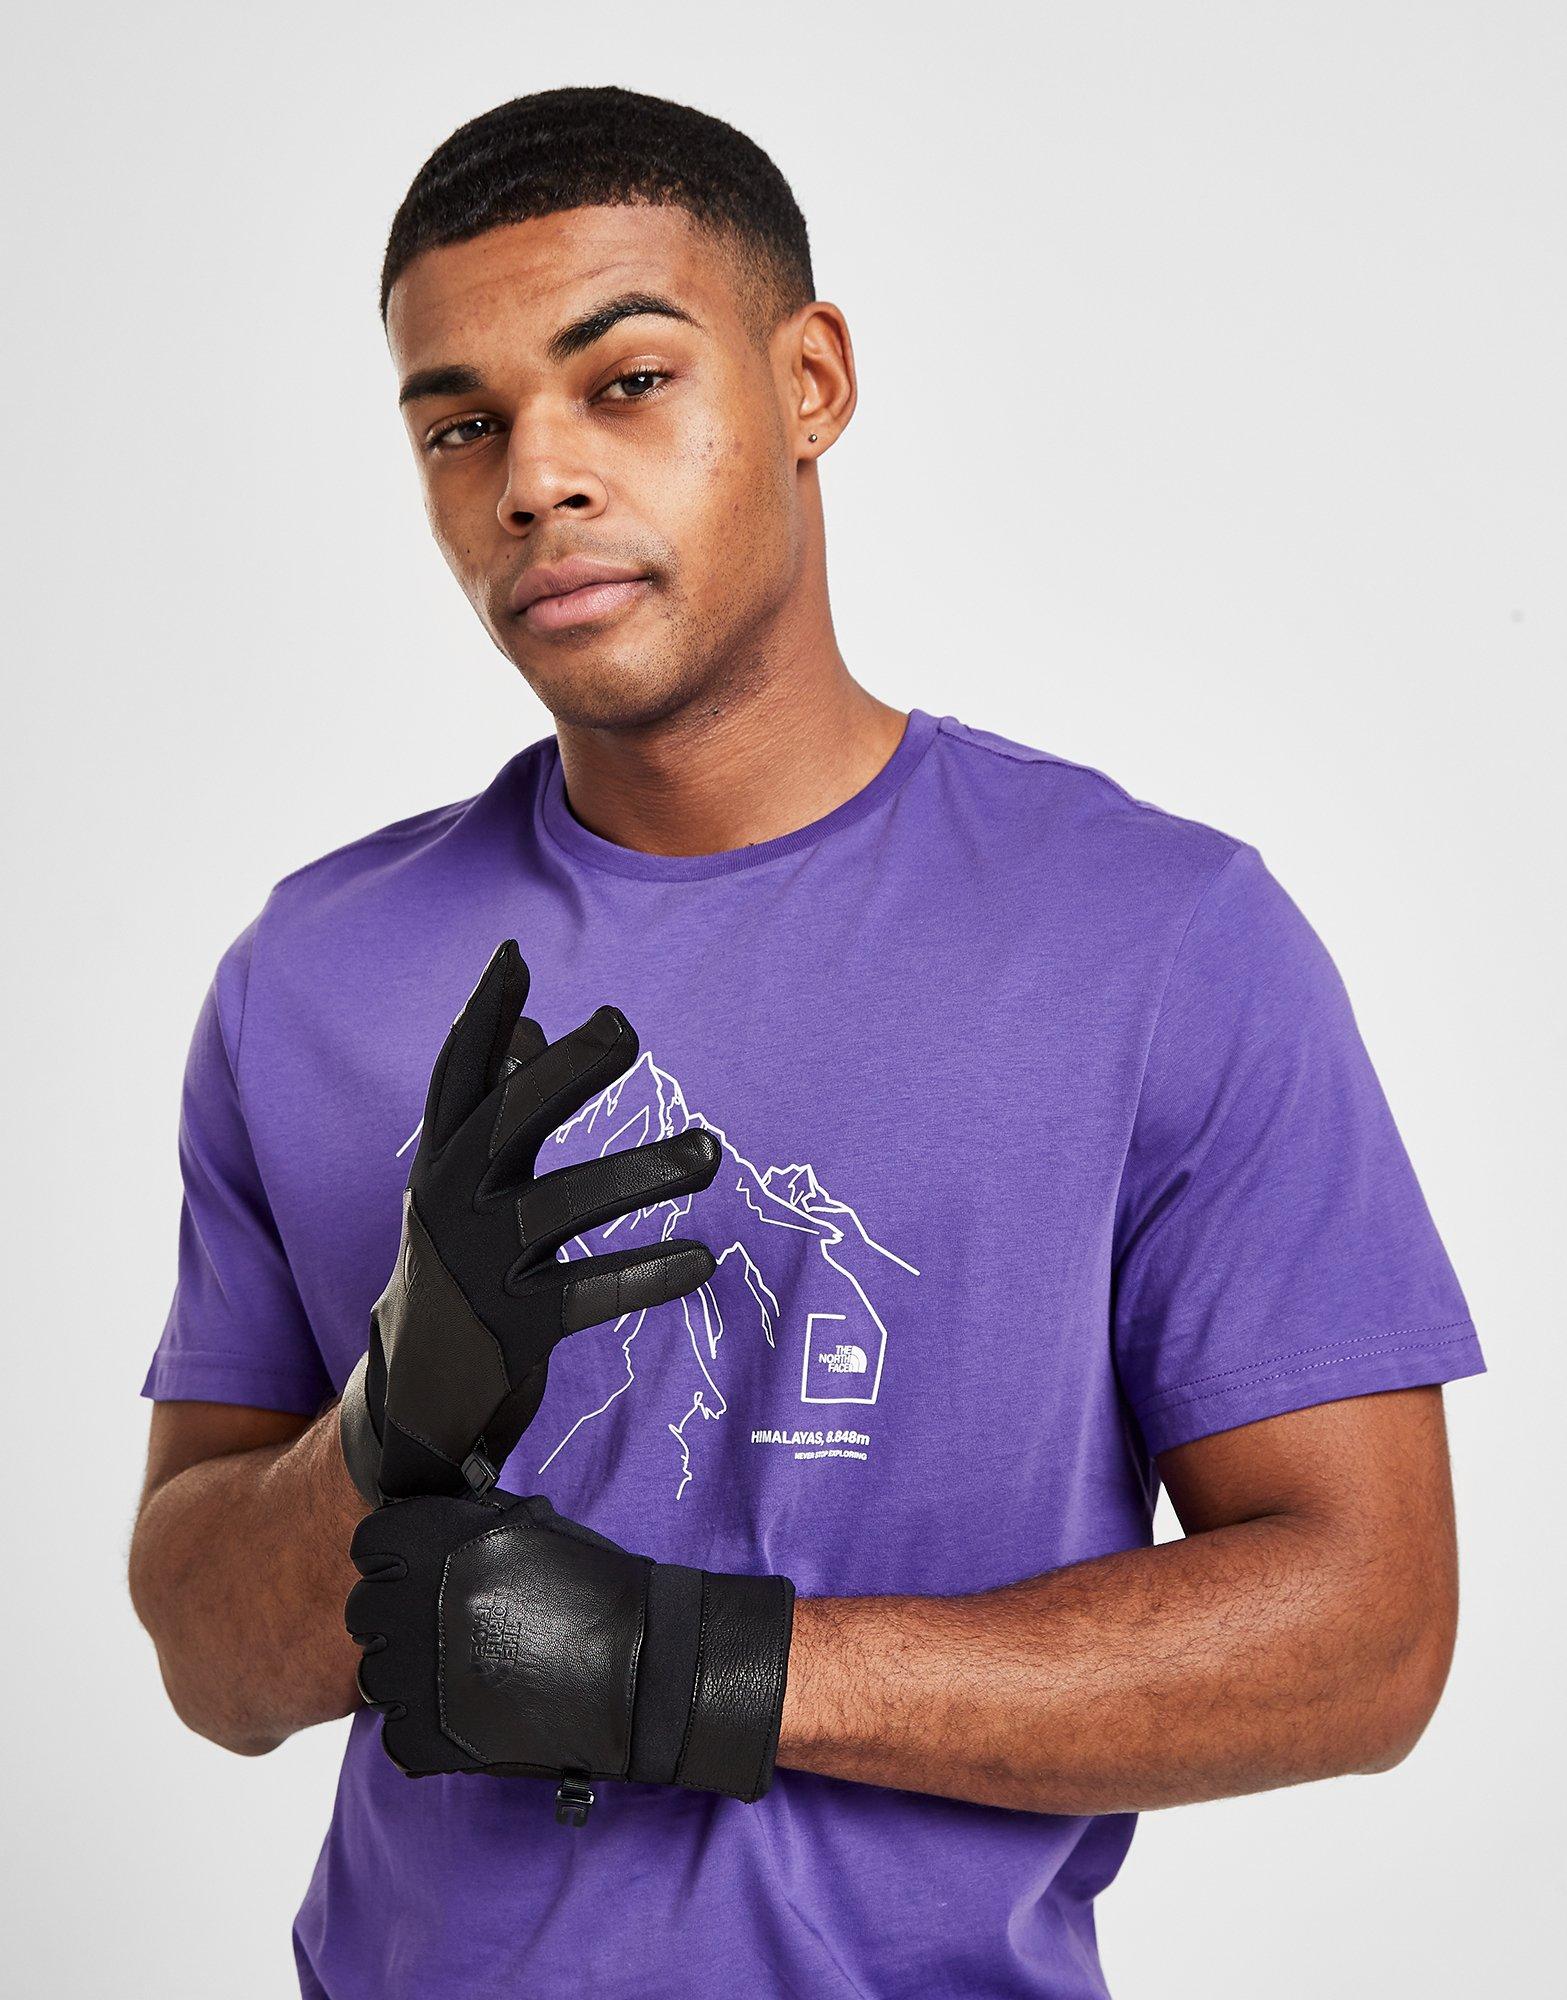 north face leather gloves